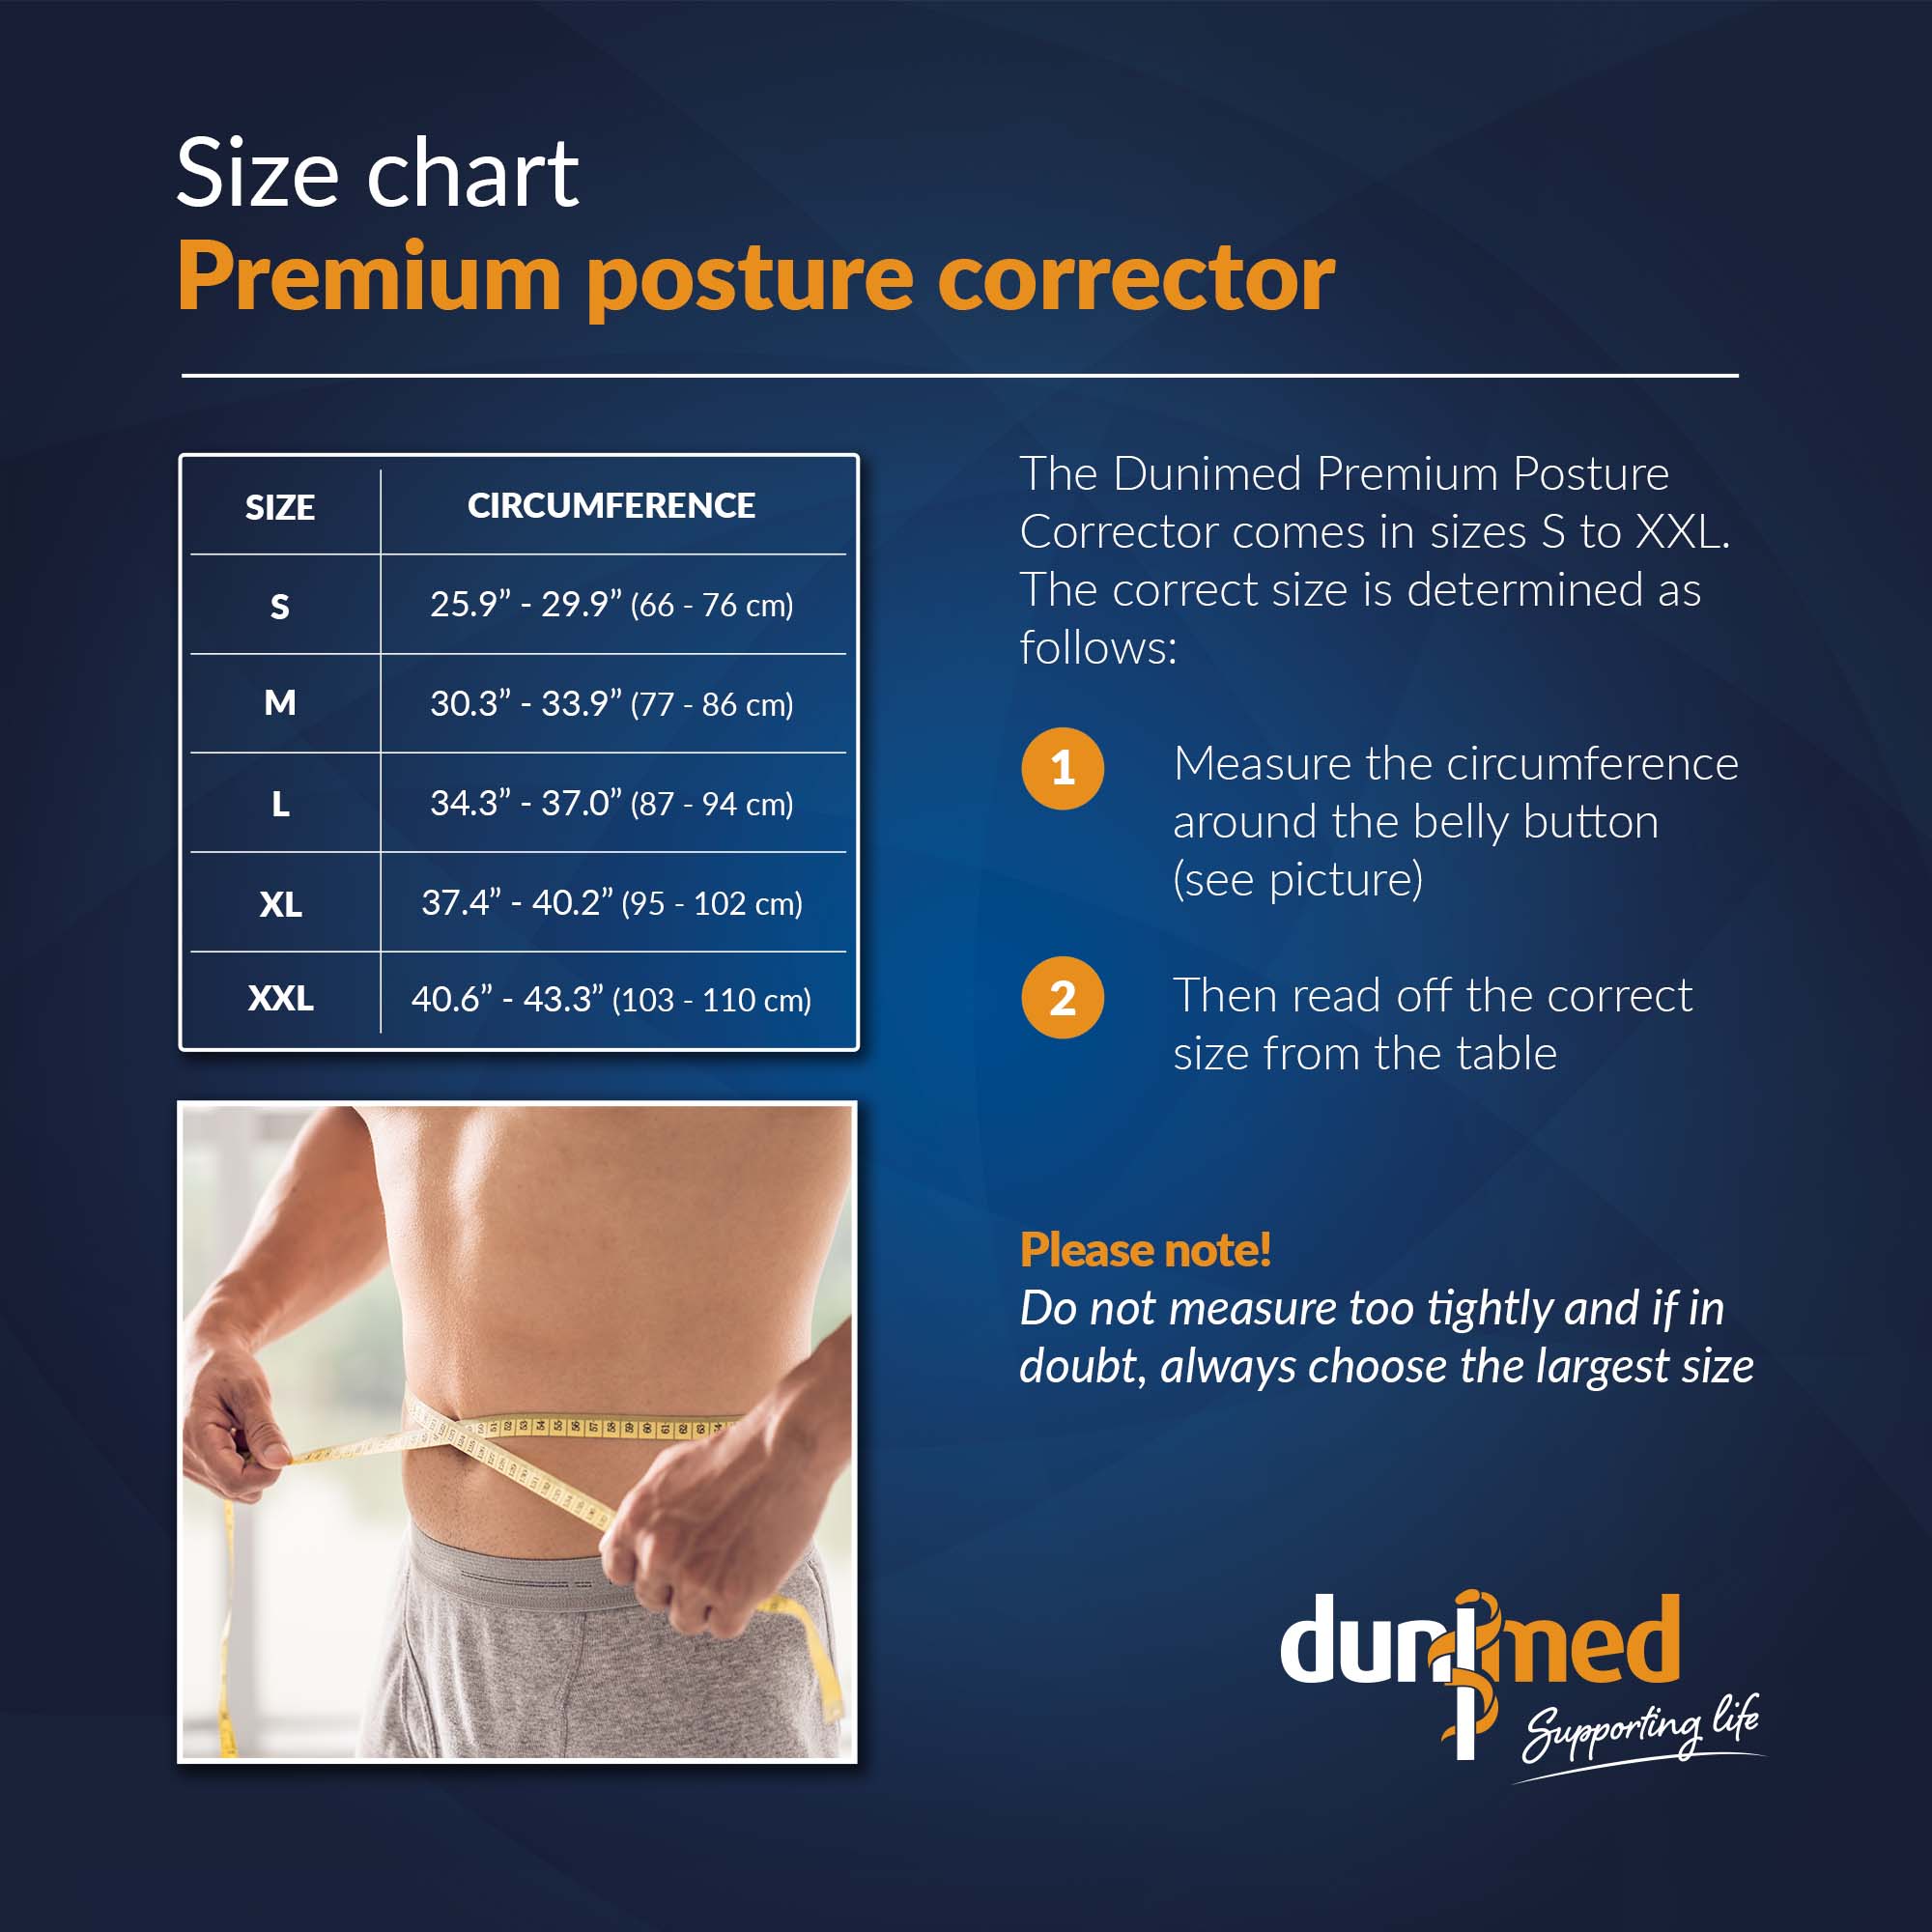 Size chart Dunimed Posture Corrector